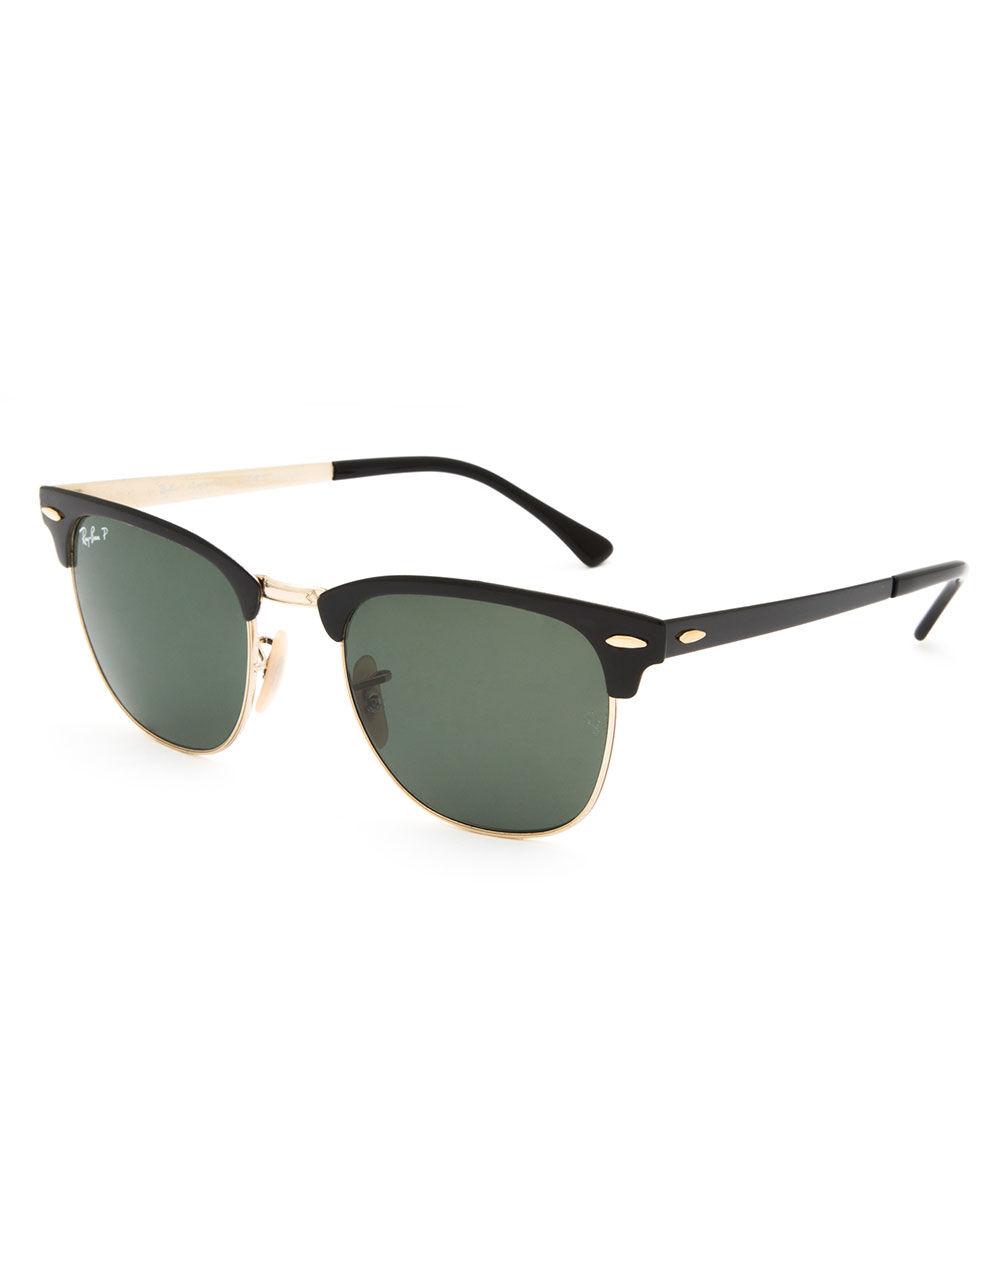 Ray-Ban Clubmaster Metal Black & Green Classic Polarized Sunglasses for ...